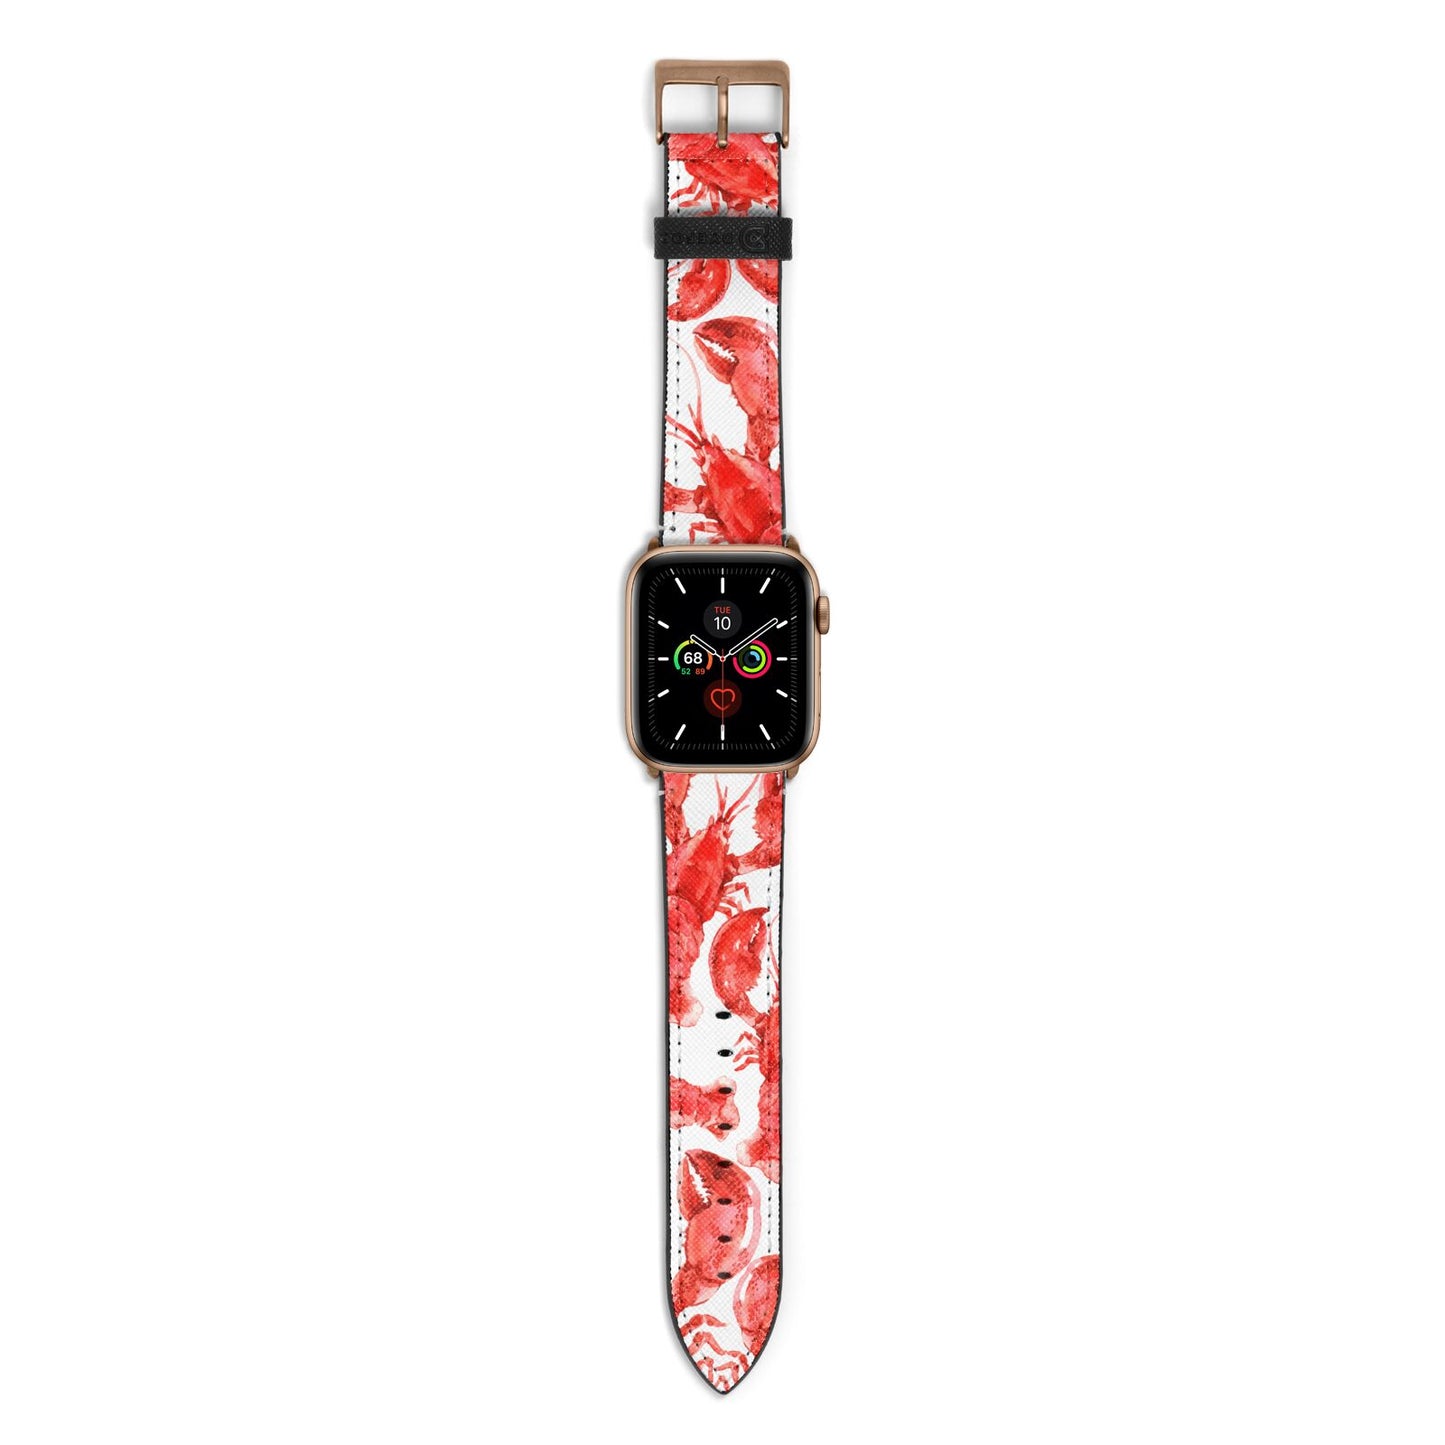 Lobster Apple Watch Strap with Gold Hardware